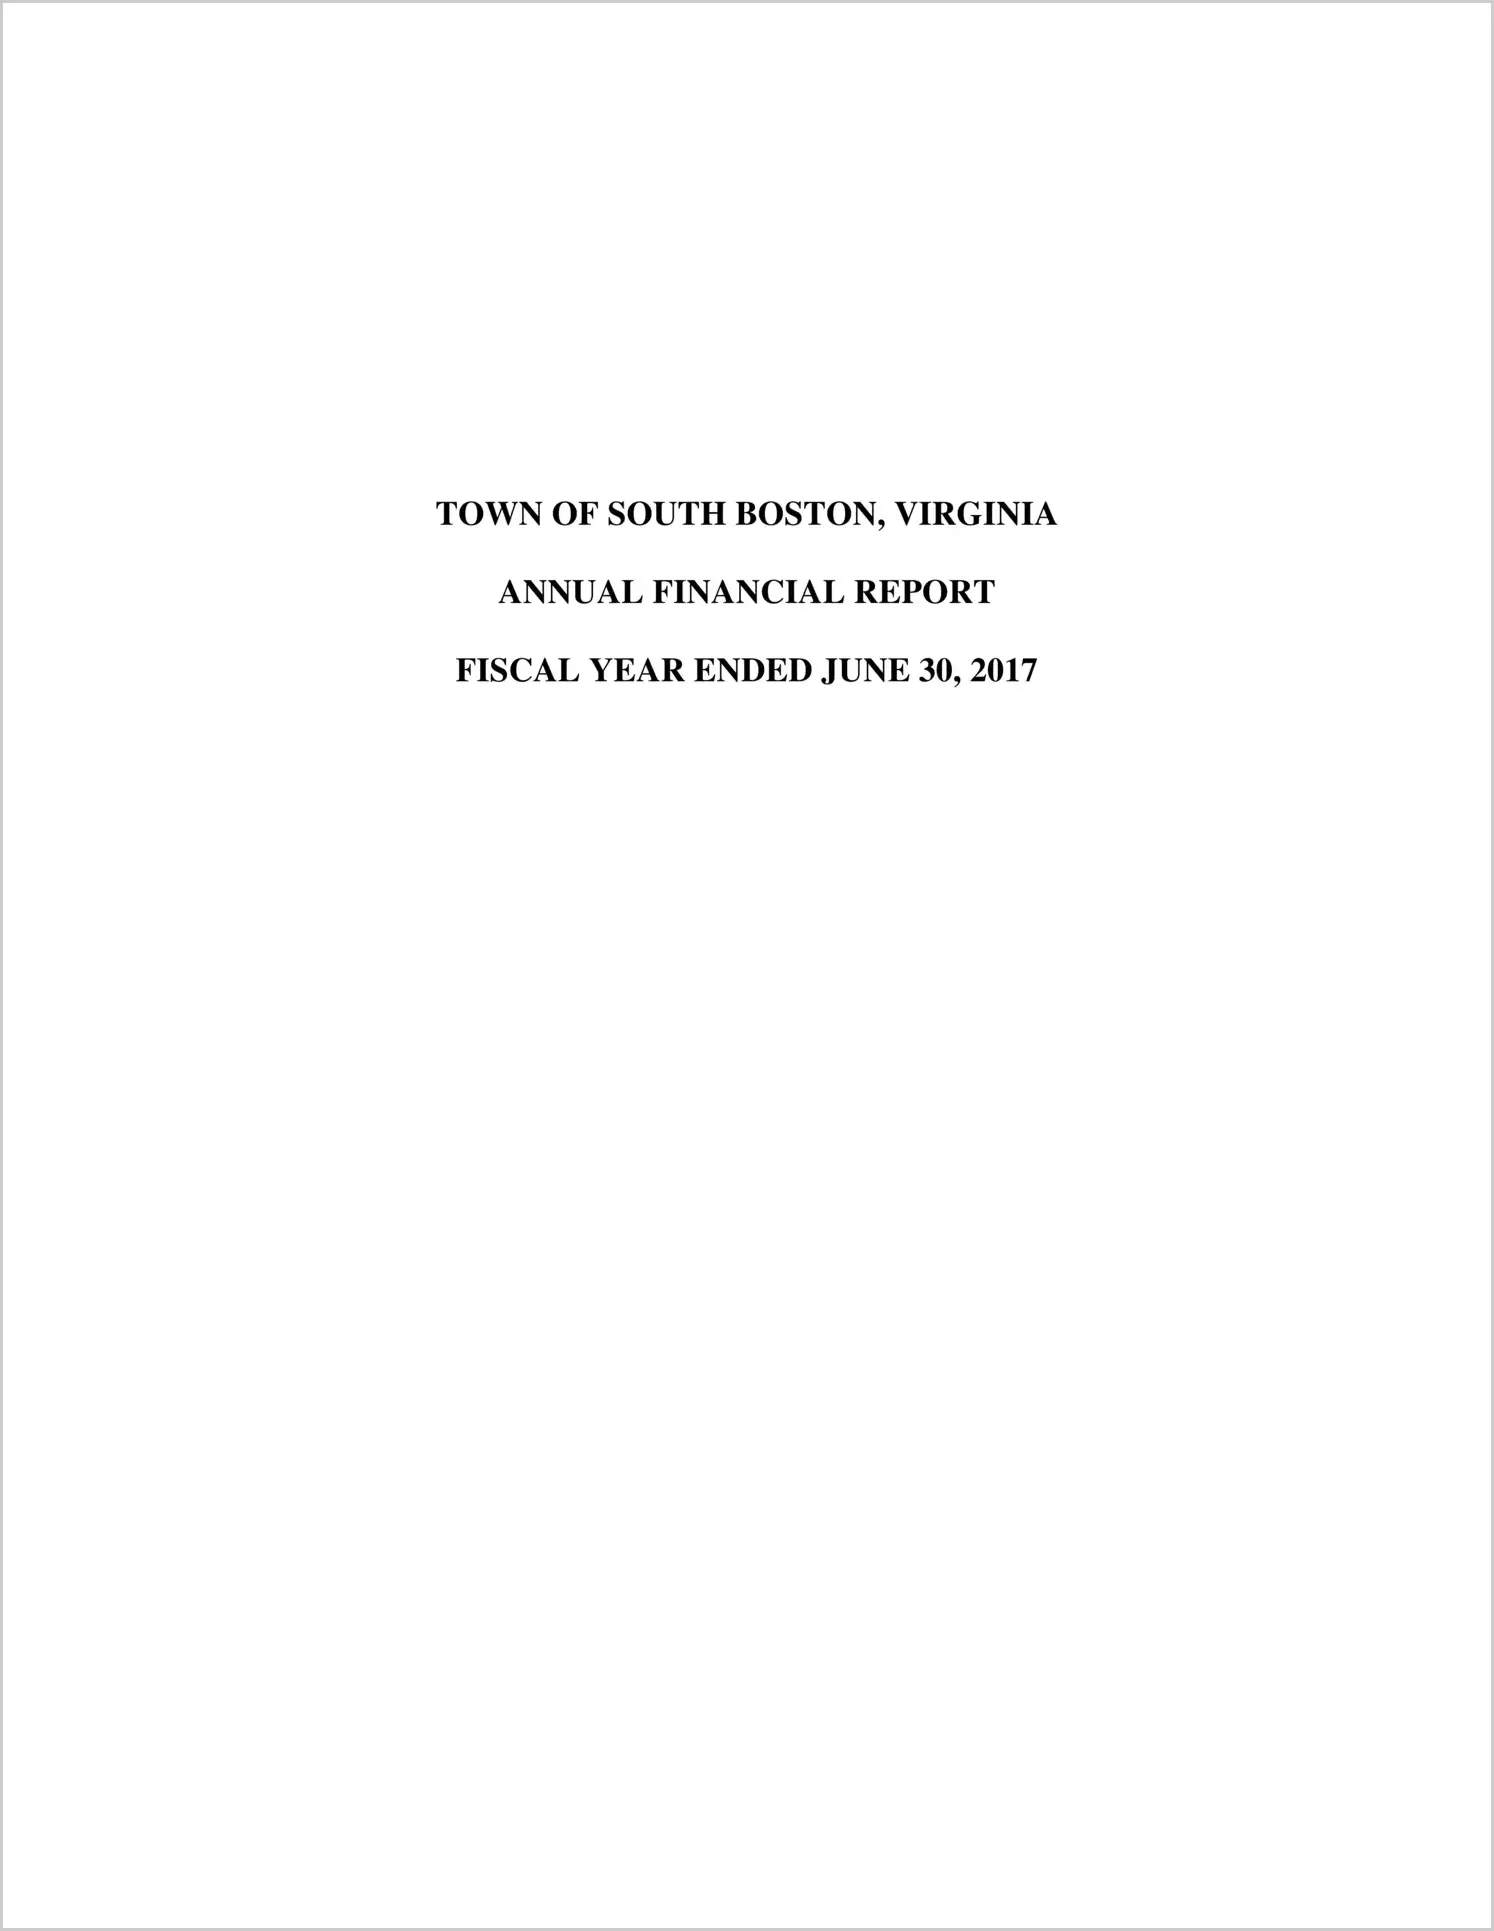 2017 Annual Financial Report for Town of South Boston